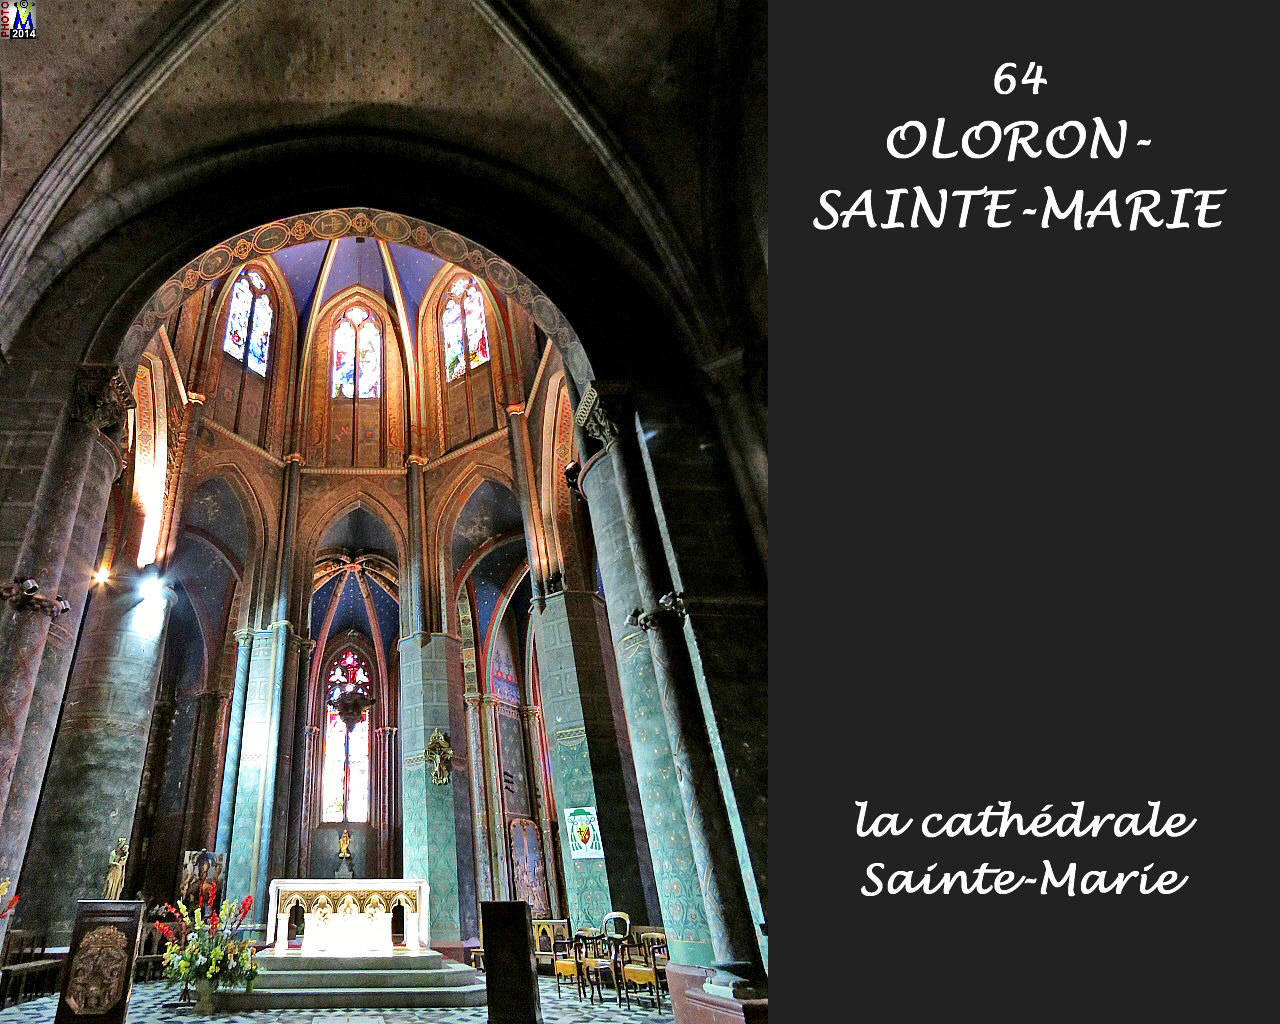 64OLORON-STE-MARIE_cathedrale_210.jpg